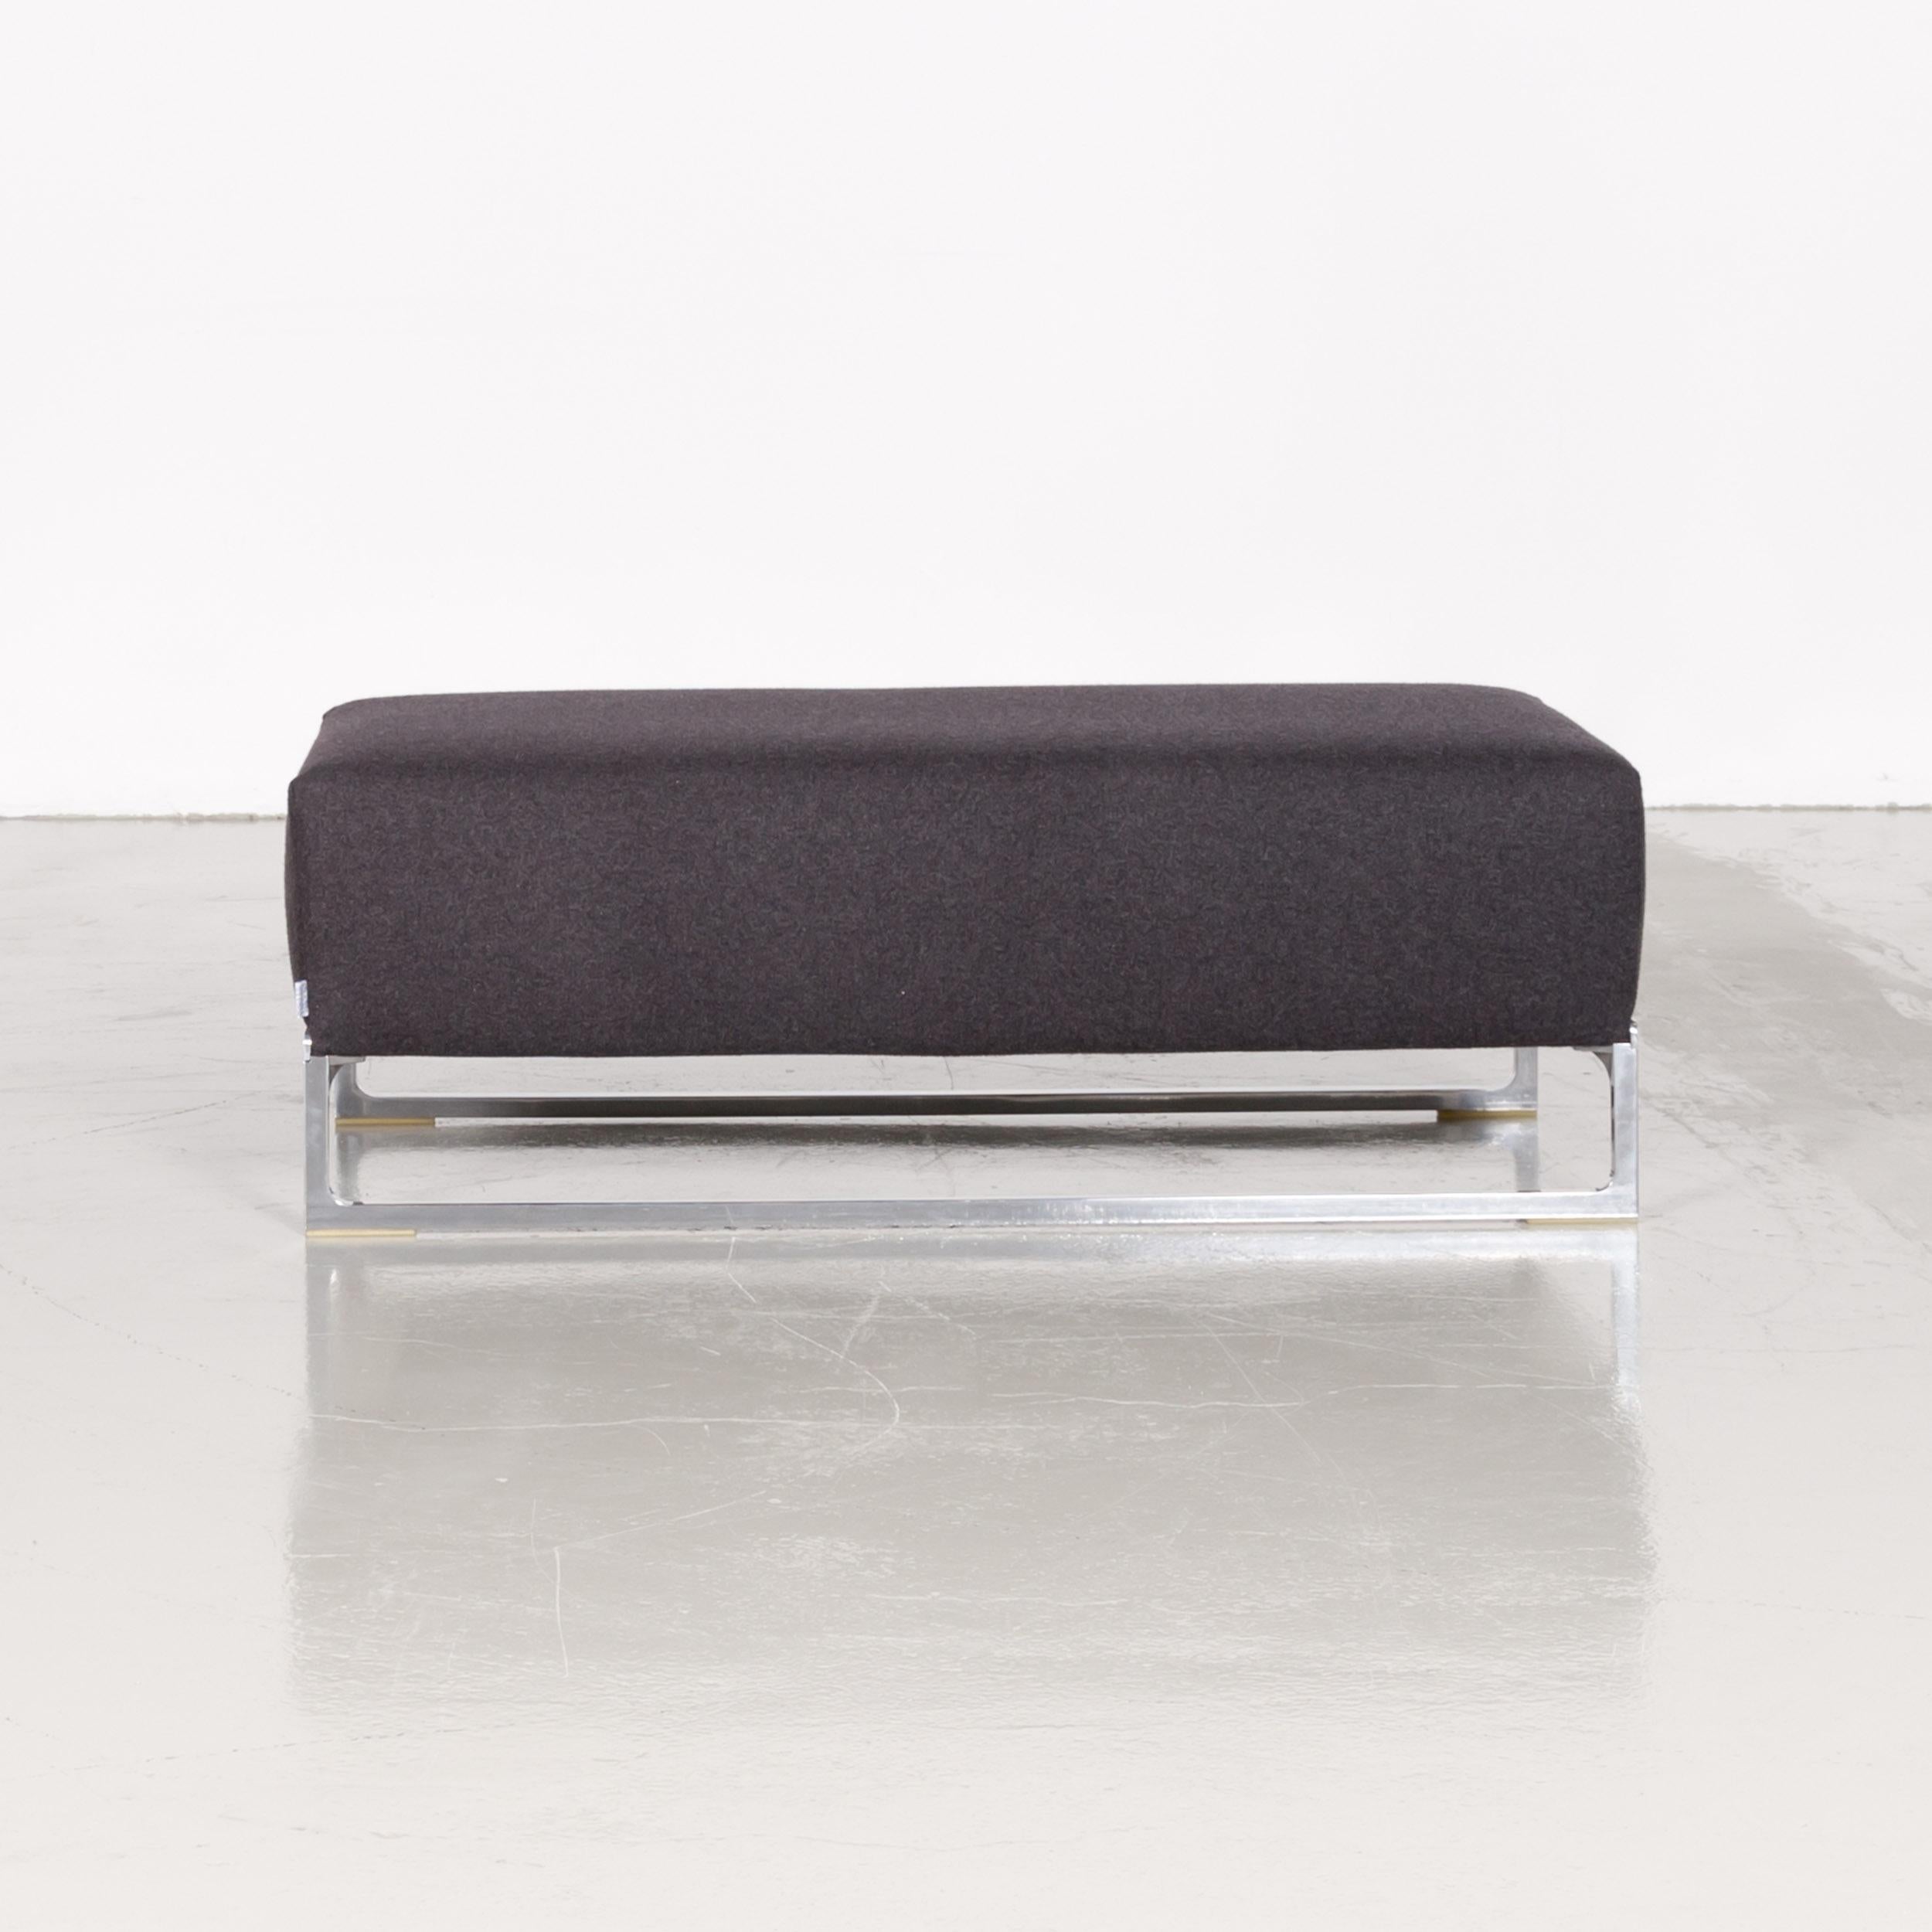 B&B Italia solo designer foot stool in grey anthractite fabric as good as new.